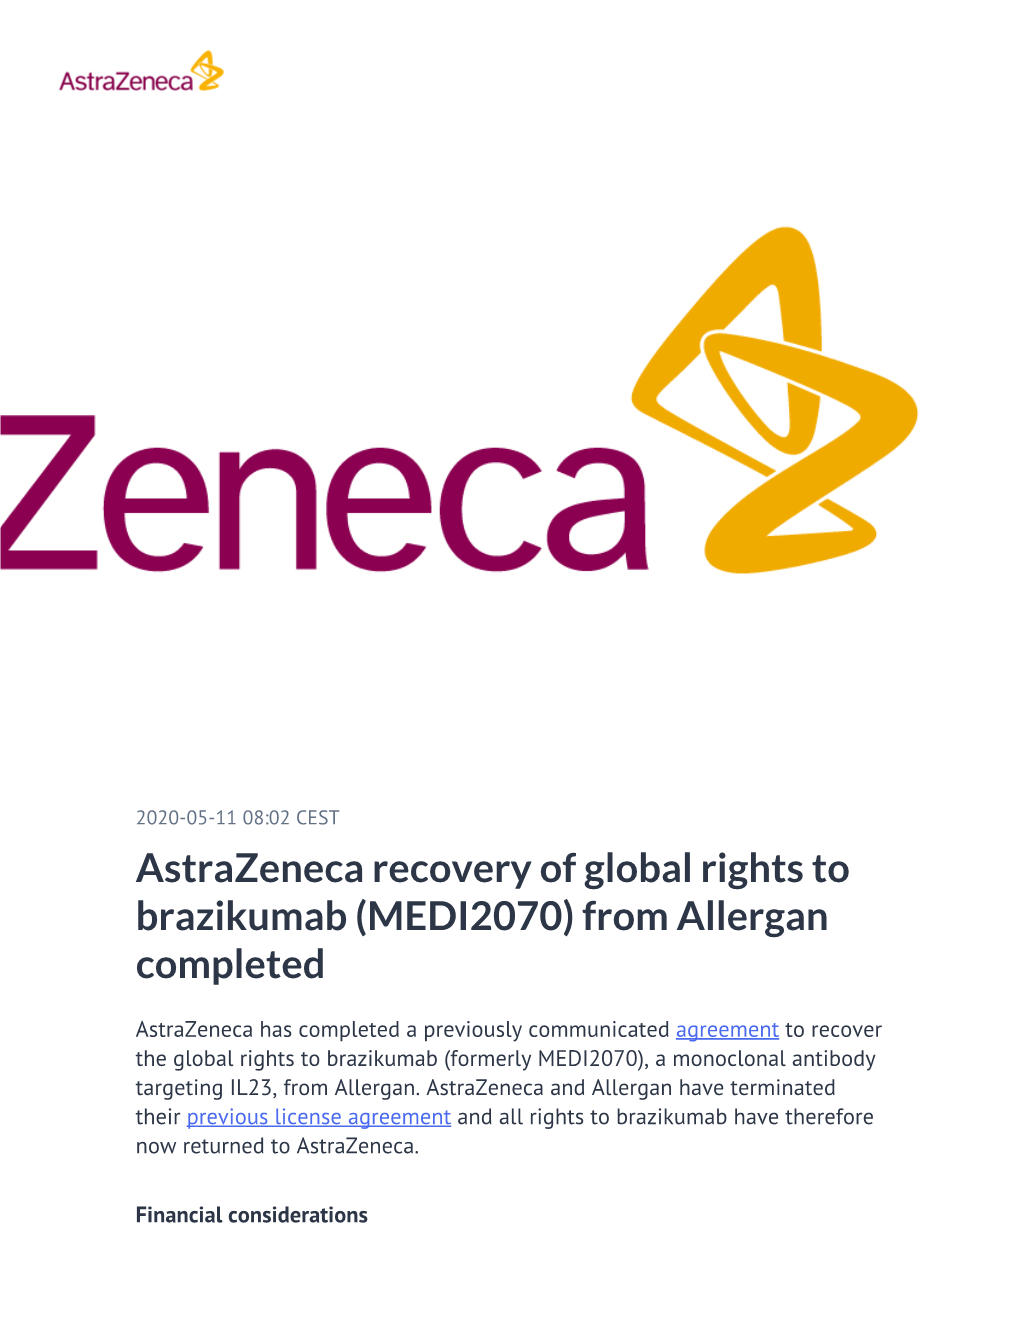 Astrazeneca Recovery of Global Rights to Brazikumab (MEDI2070) from Allergan Completed